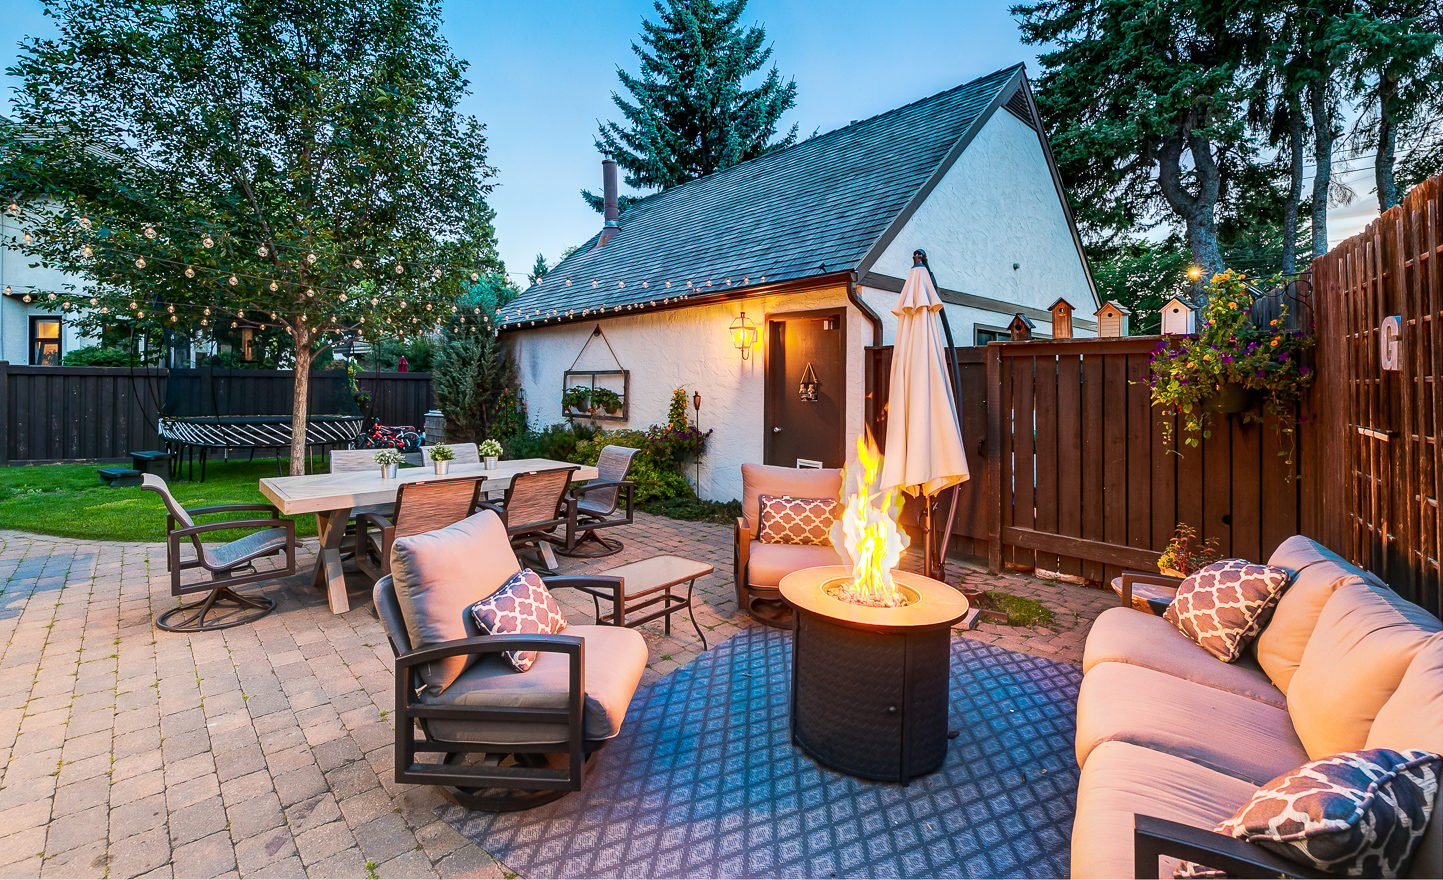 2023 twilight property real estate photography in calgary and Edmonton for real state agents